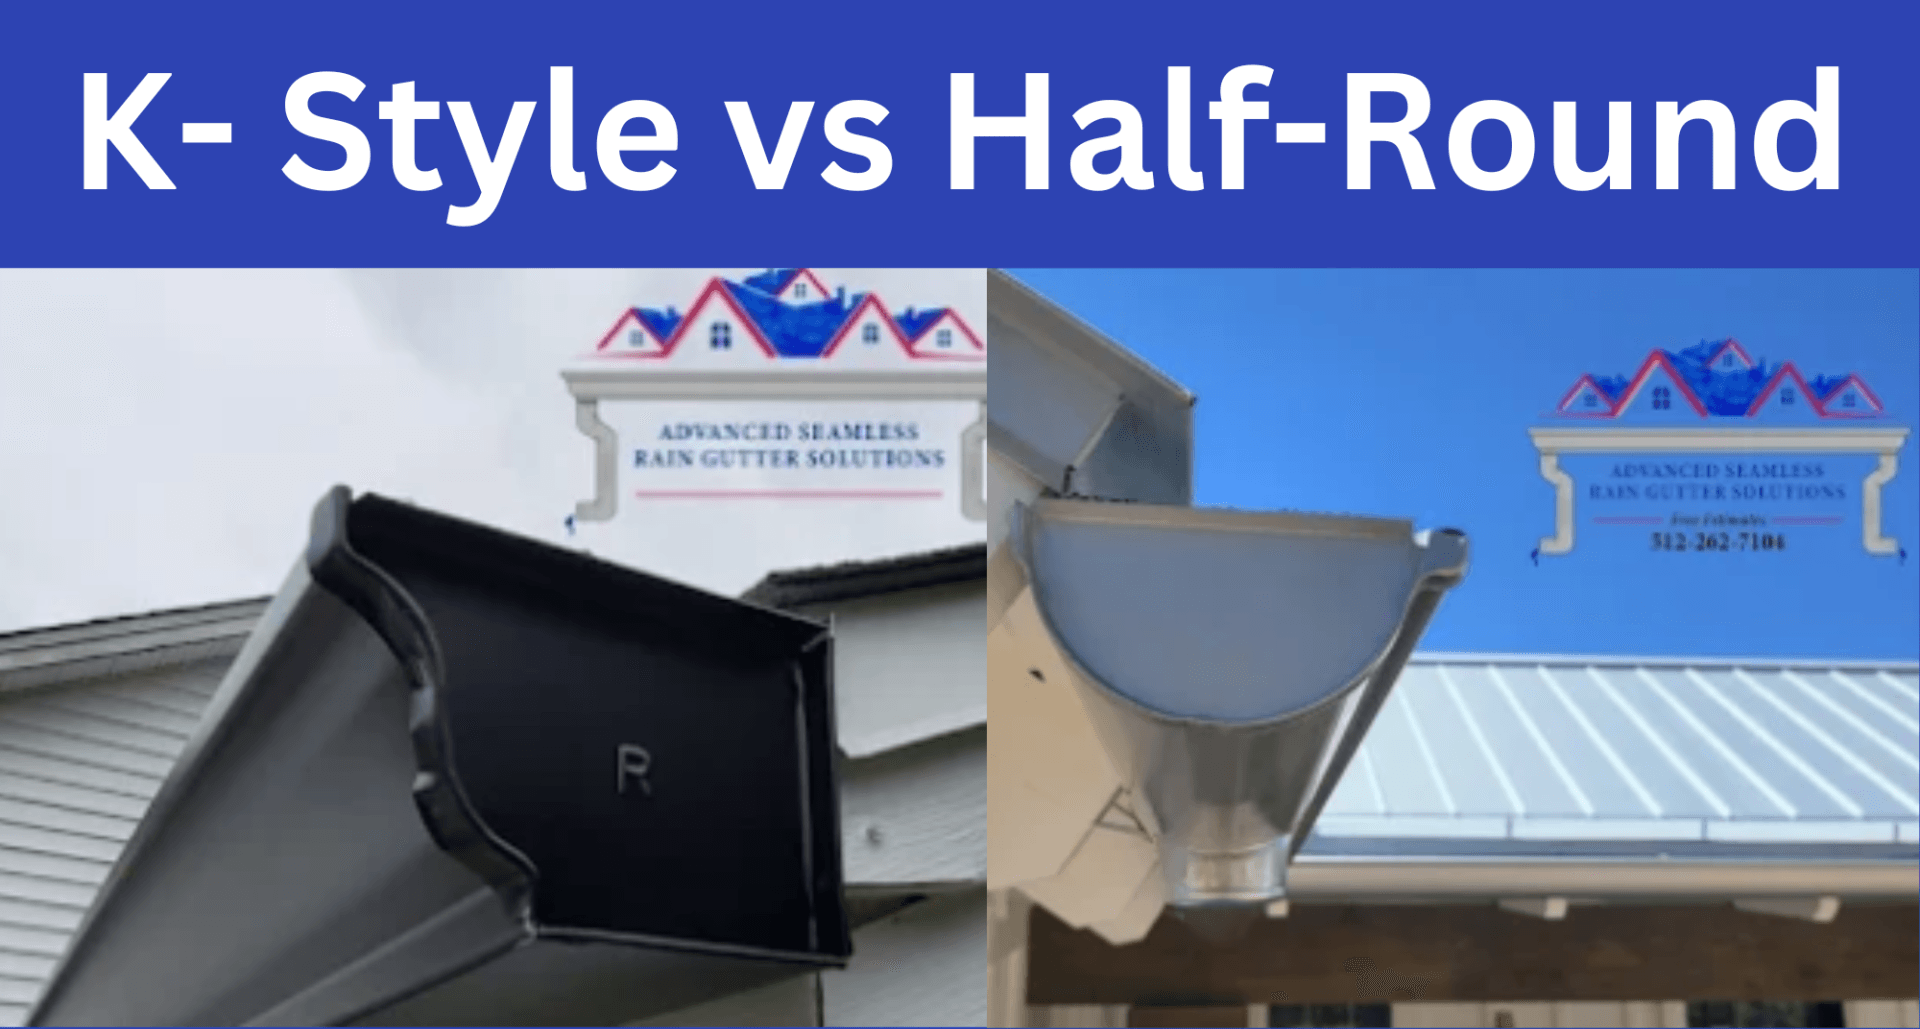 K-Style Gutters VS. Half-Round Gutters - Which is better?